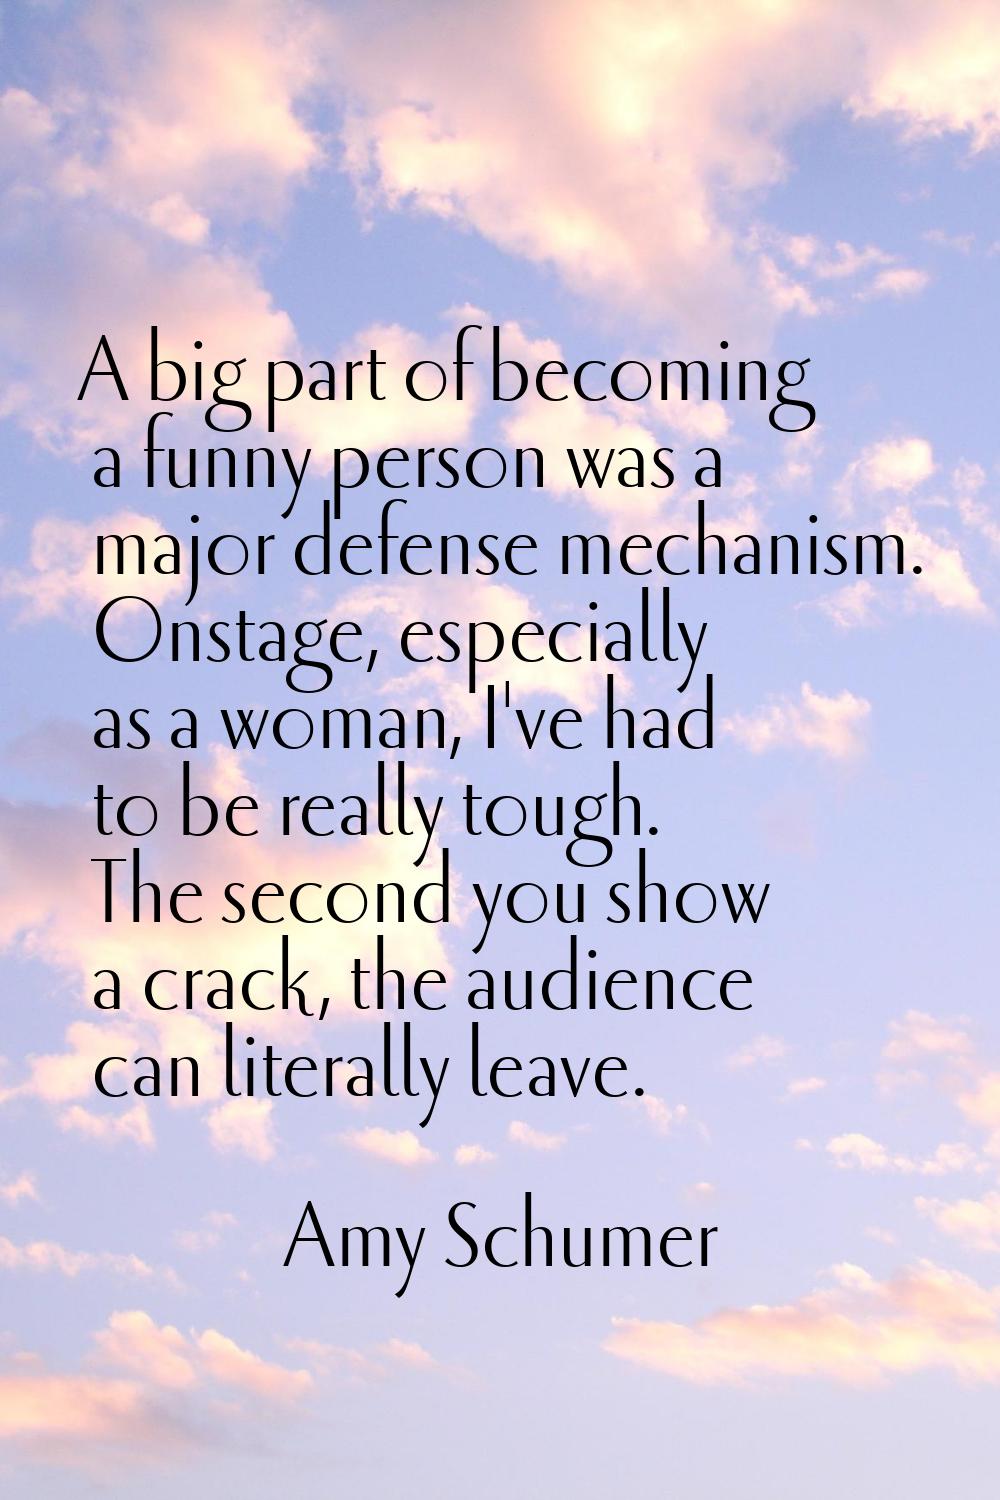 A big part of becoming a funny person was a major defense mechanism. Onstage, especially as a woman